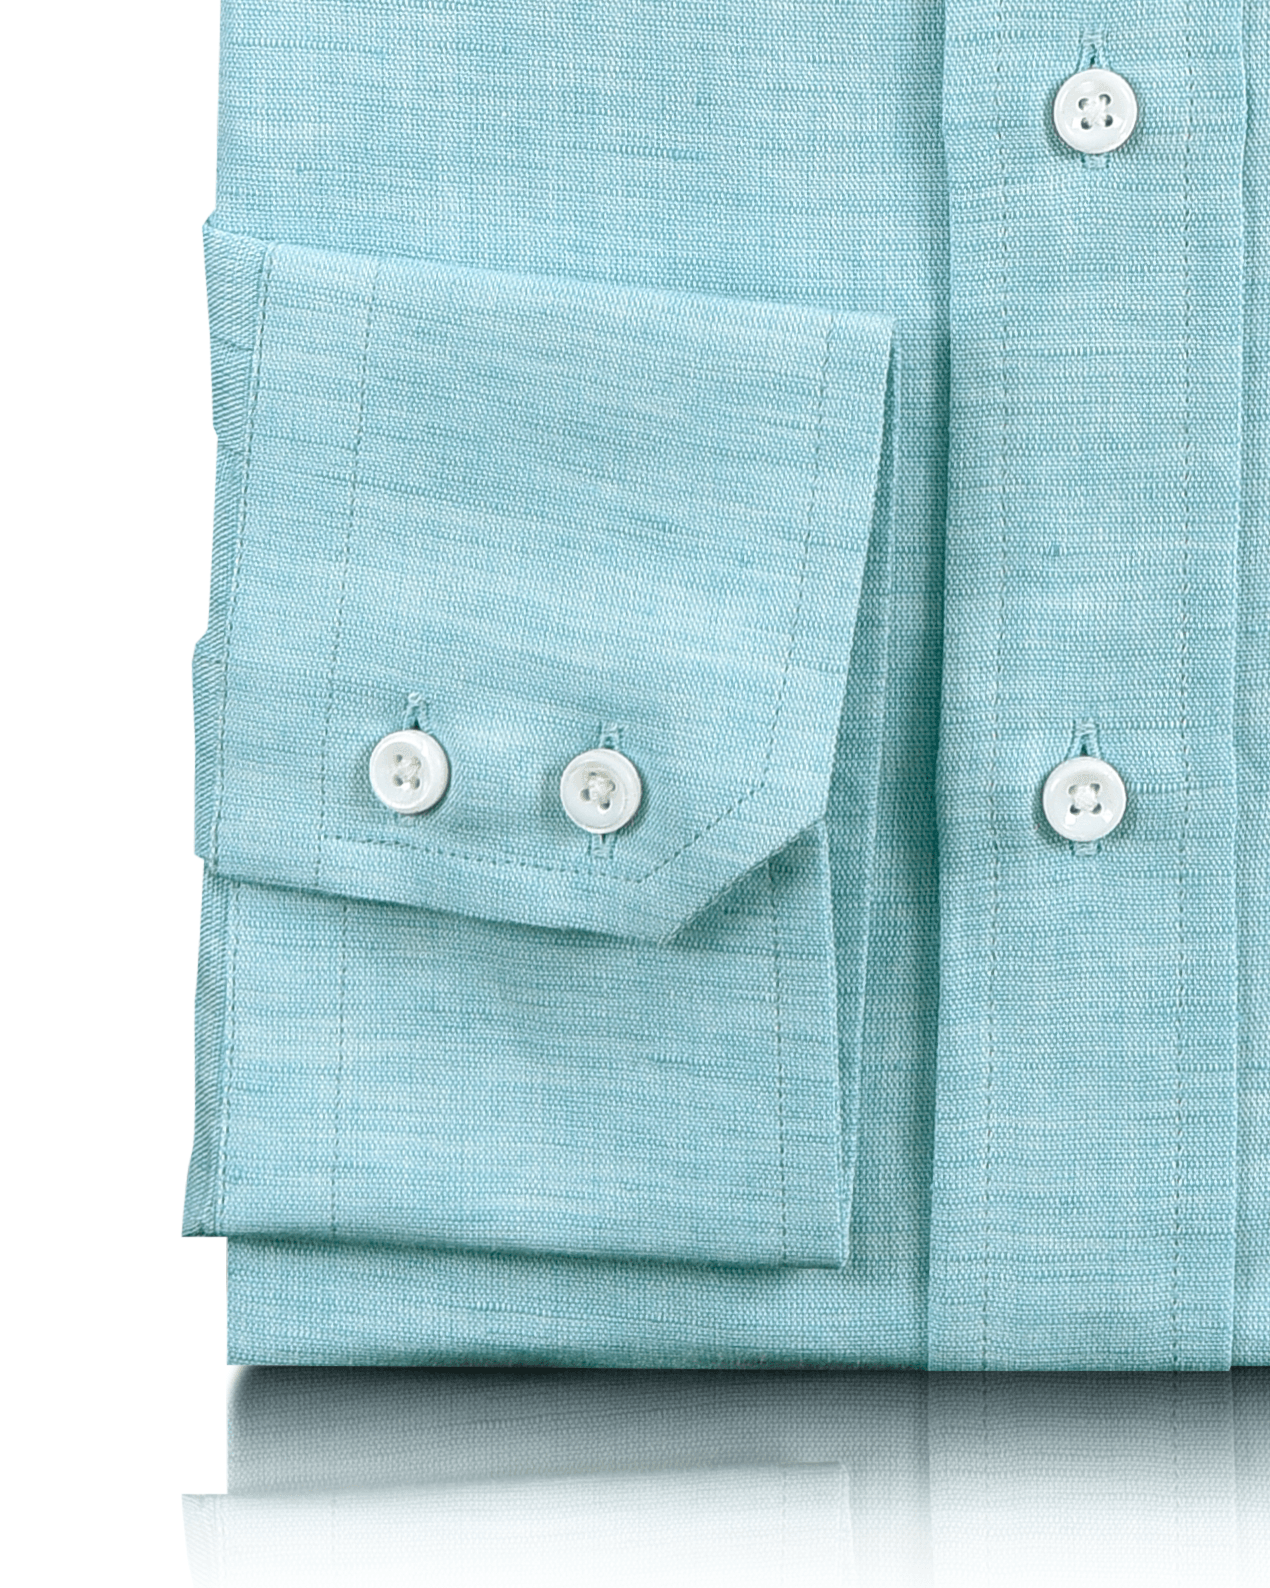 Cuff of custom linen shirt for men in mint cream by Luxire Clothing